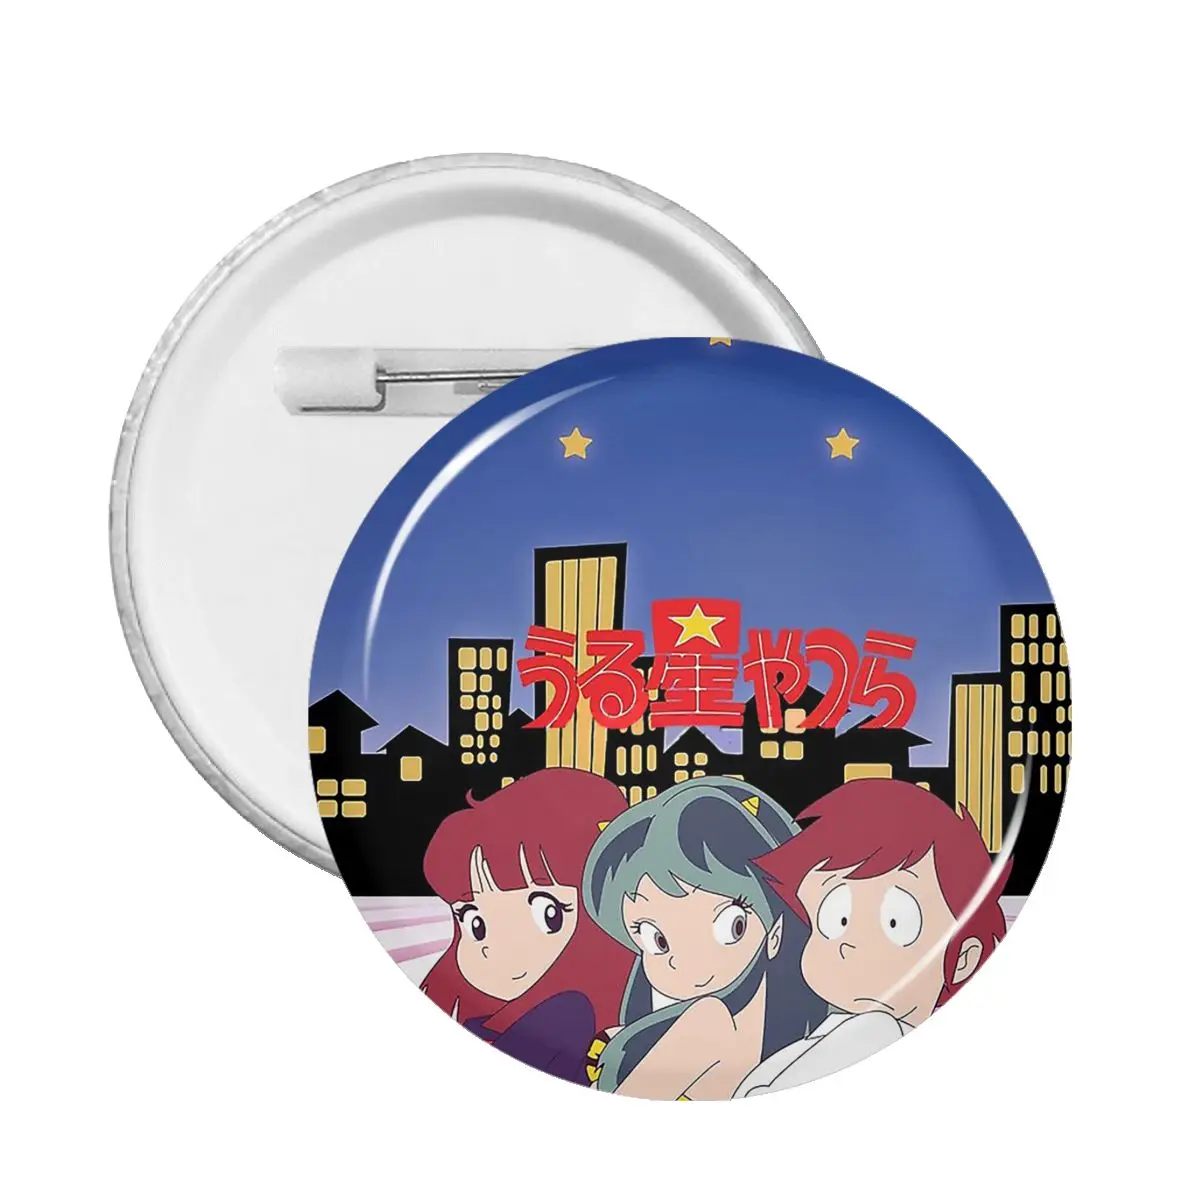 PVC Urusei Yatsura Collar Badge Cute Badge Lum 80s Anime Pins Brooches for Hat Anime Fans Collections